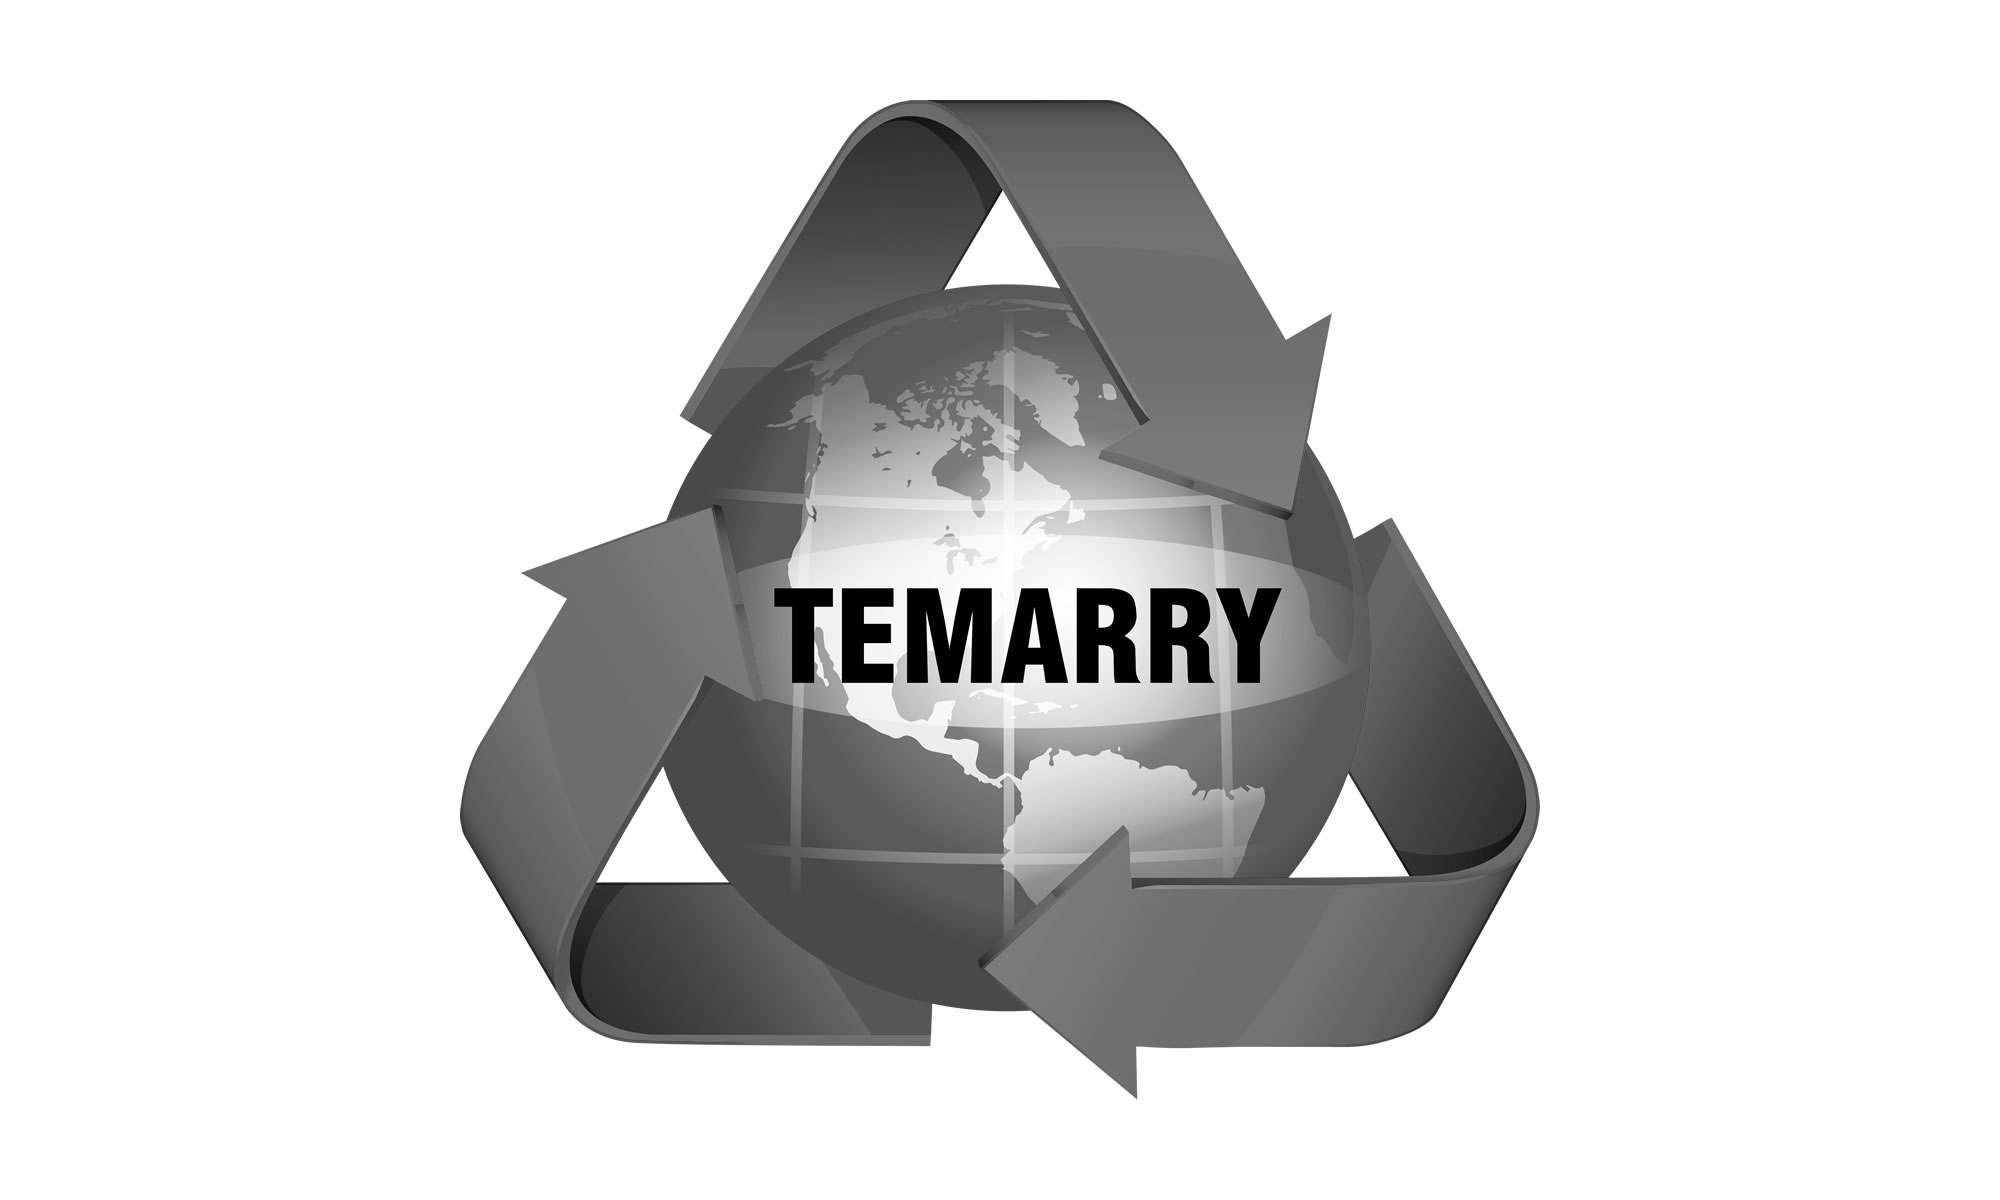 Temarry Recycling was the first authorized company in the United States to be authorized by the Environmental Protection Agency to export certain wastes to Mexico.